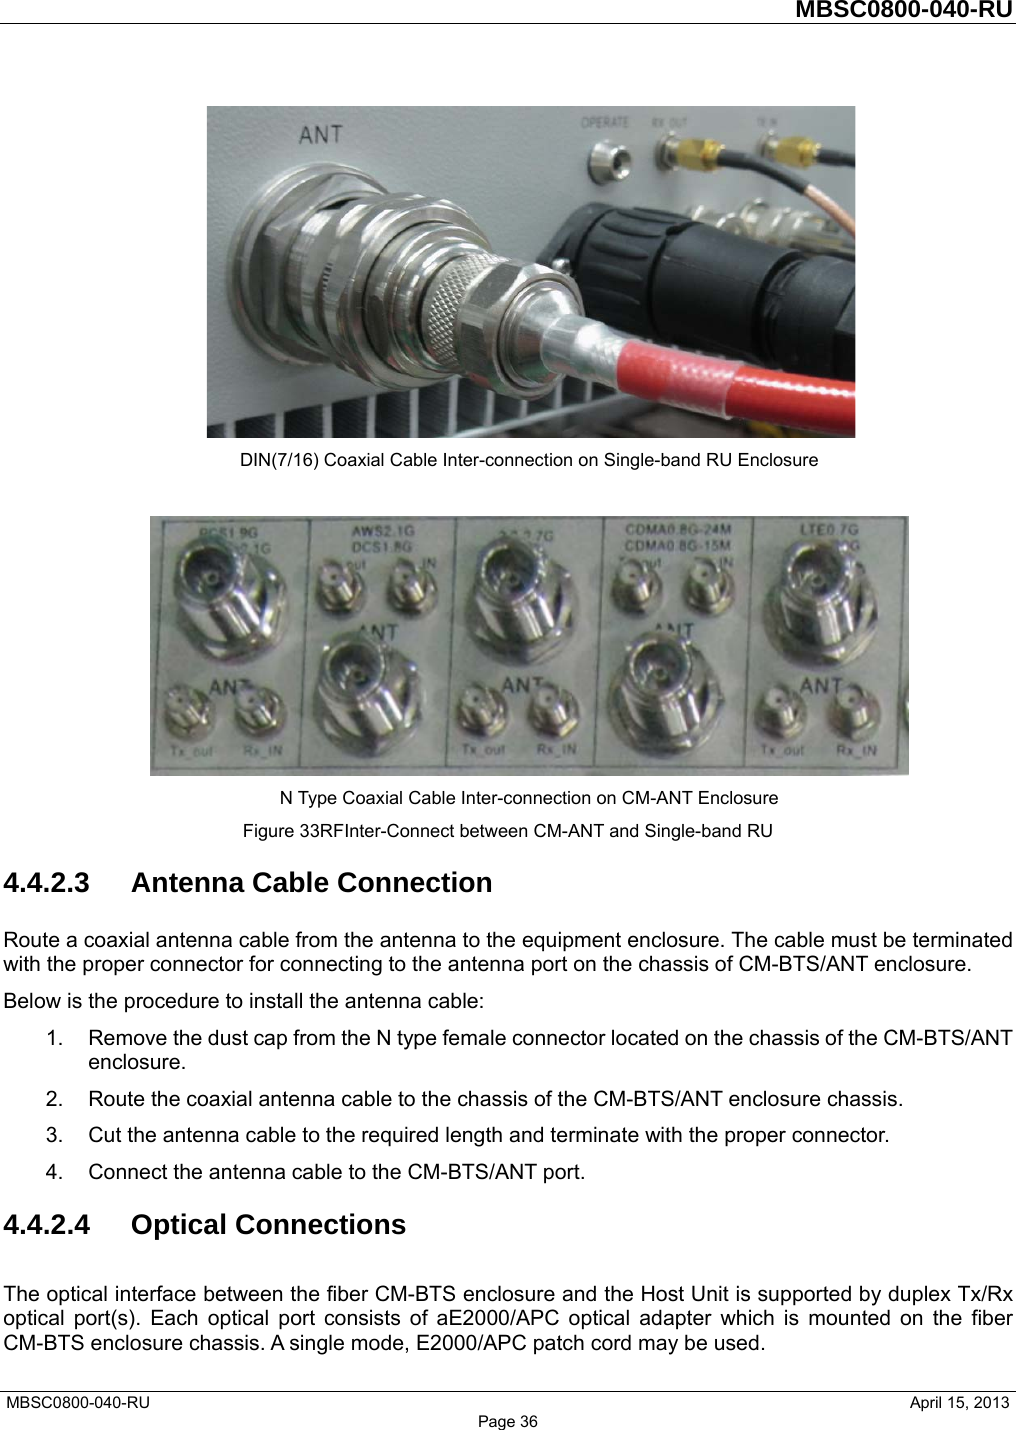         MBSC0800-040-RU   MBSC0800-040-RU                                                   April 15, 2013 Page 36  DIN(7/16) Coaxial Cable Inter-connection on Single-band RU Enclosure   N Type Coaxial Cable Inter-connection on CM-ANT Enclosure Figure 33RFInter-Connect between CM-ANT and Single-band RU 4.4.2.3  Antenna Cable Connection Route a coaxial antenna cable from the antenna to the equipment enclosure. The cable must be terminated with the proper connector for connecting to the antenna port on the chassis of CM-BTS/ANT enclosure. Below is the procedure to install the antenna cable: 1.  Remove the dust cap from the N type female connector located on the chassis of the CM-BTS/ANT enclosure. 2.  Route the coaxial antenna cable to the chassis of the CM-BTS/ANT enclosure chassis. 3.  Cut the antenna cable to the required length and terminate with the proper connector. 4.  Connect the antenna cable to the CM-BTS/ANT port. 4.4.2.4 Optical Connections The optical interface between the fiber CM-BTS enclosure and the Host Unit is supported by duplex Tx/Rx optical port(s). Each optical port consists of aE2000/APC optical adapter which is mounted on the fiber CM-BTS enclosure chassis. A single mode, E2000/APC patch cord may be used. 